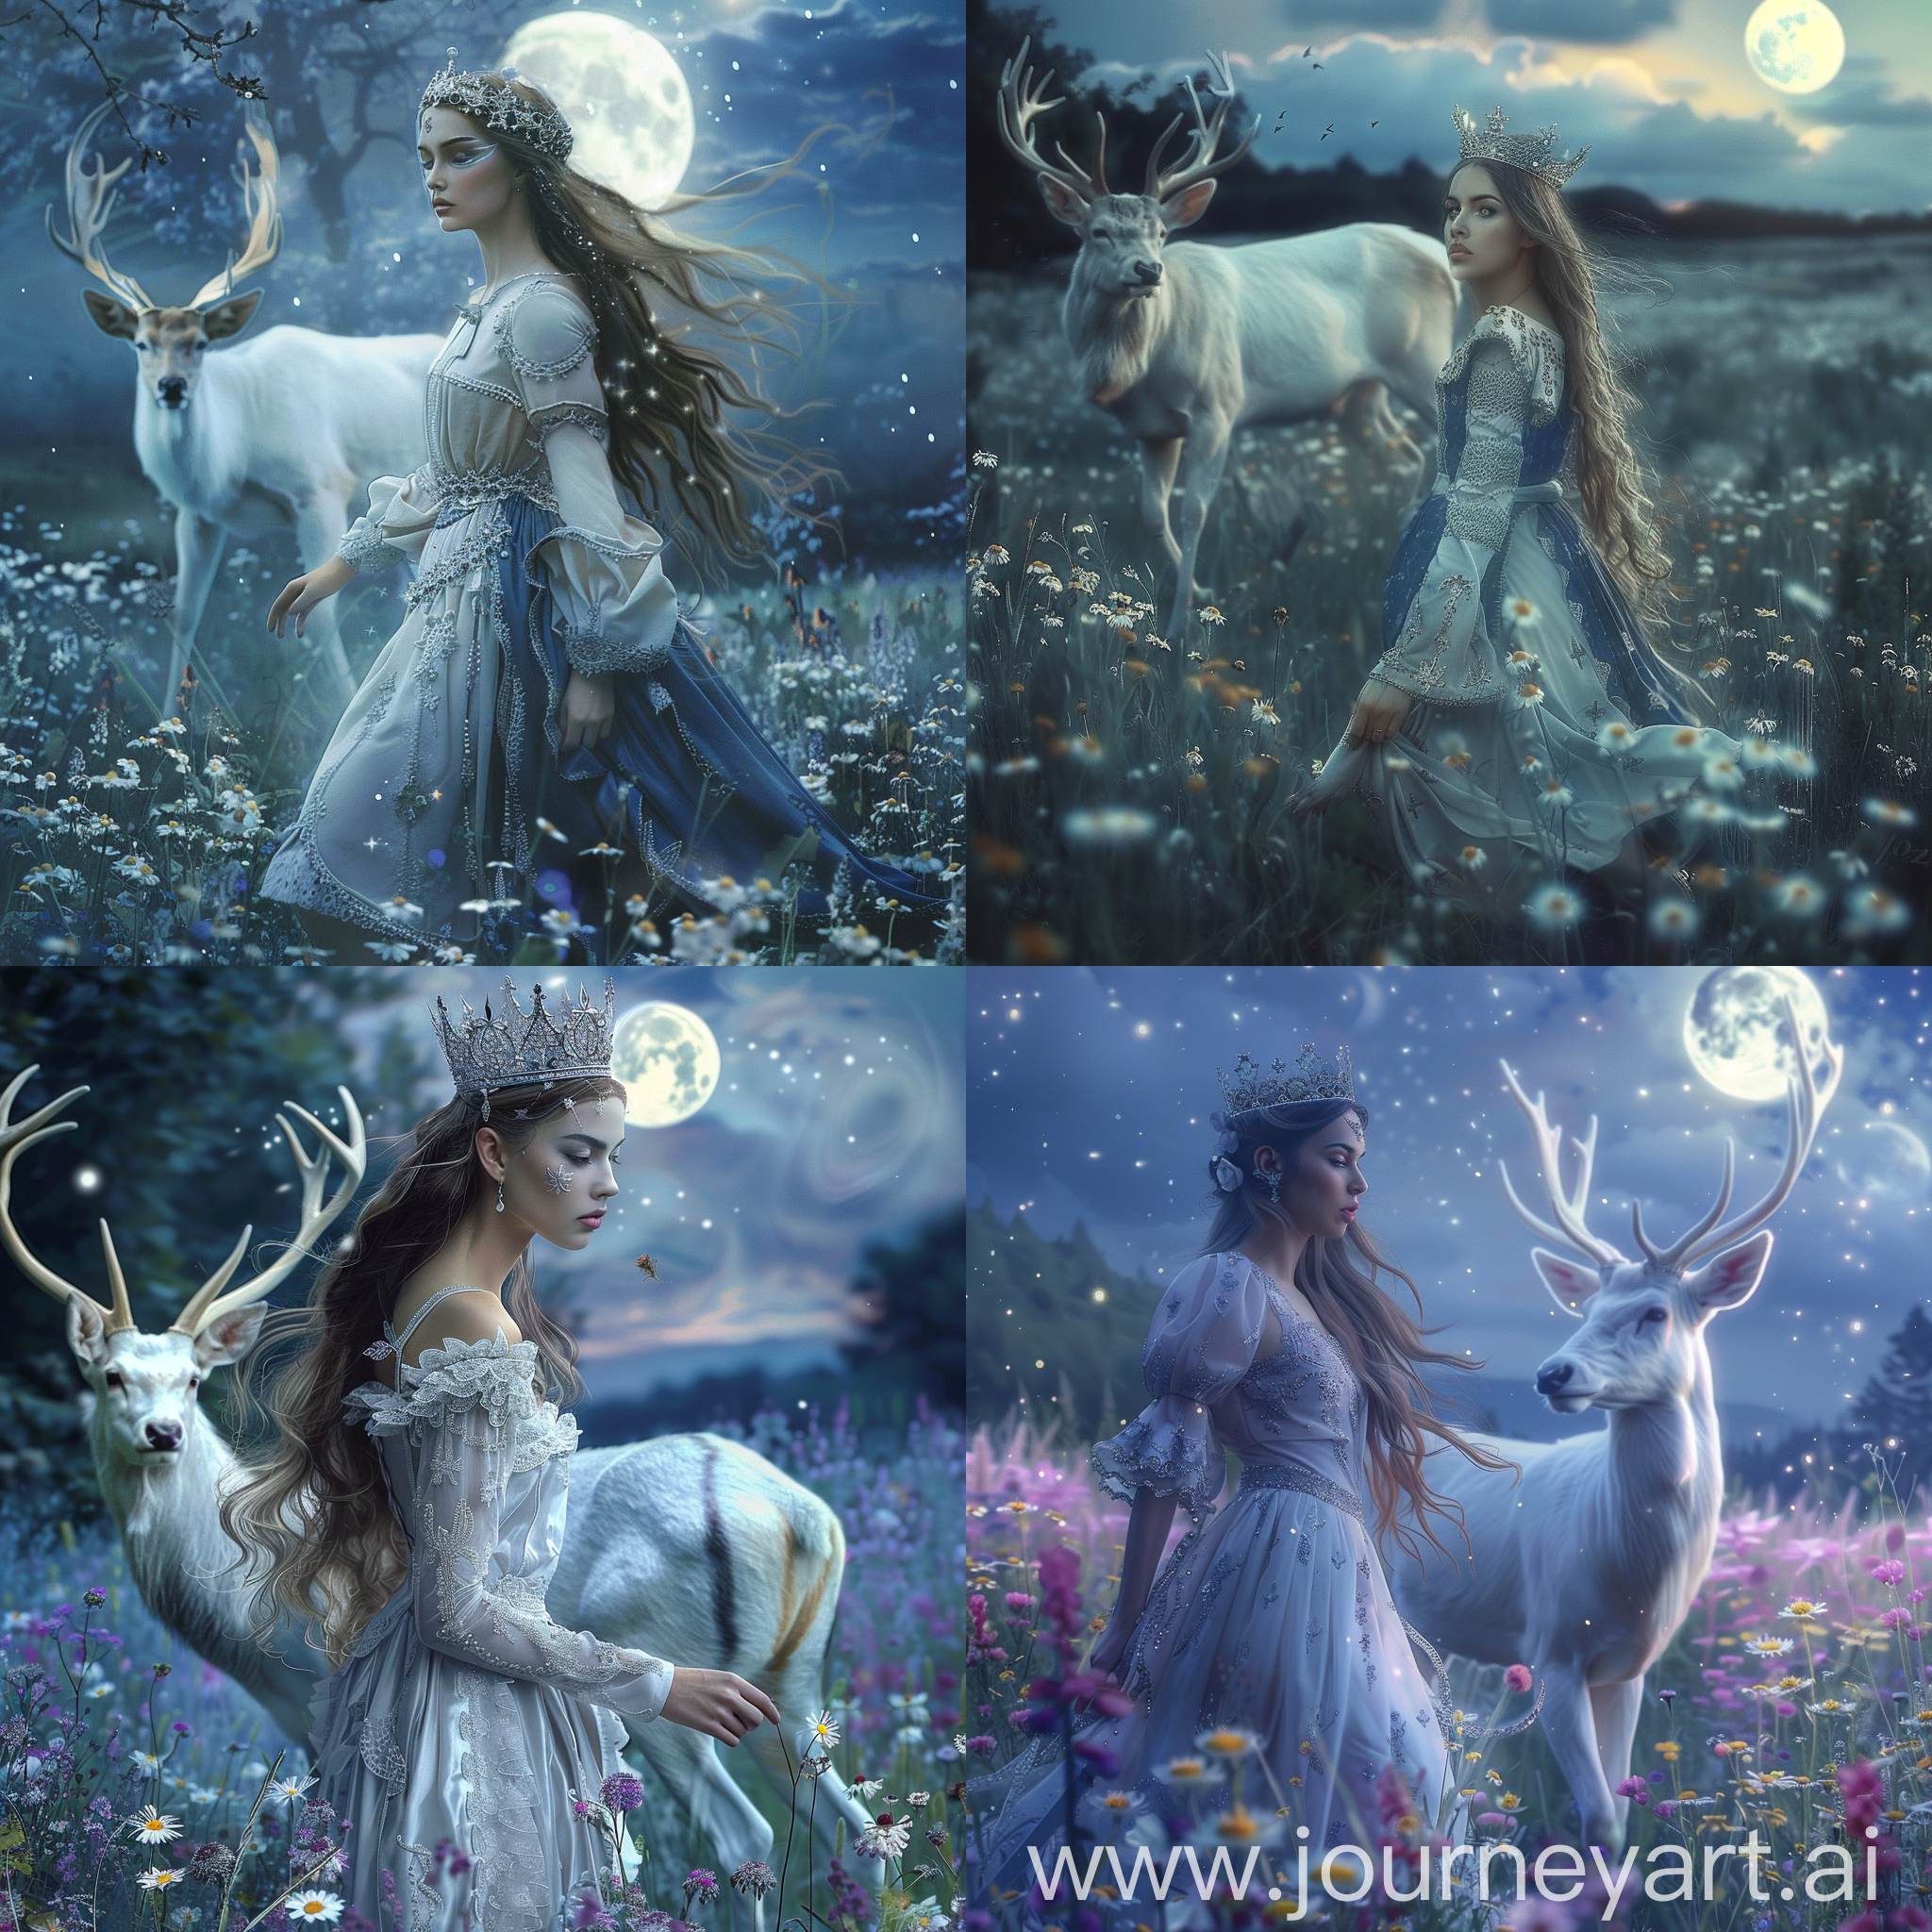 A beautiful medieval woman with delicate facial features and long hair walking with a white stag through a moonlit flowery meadow. They are both wearing silver crowns. Beautiful magical mysterious fantasy etheral highly detailed 